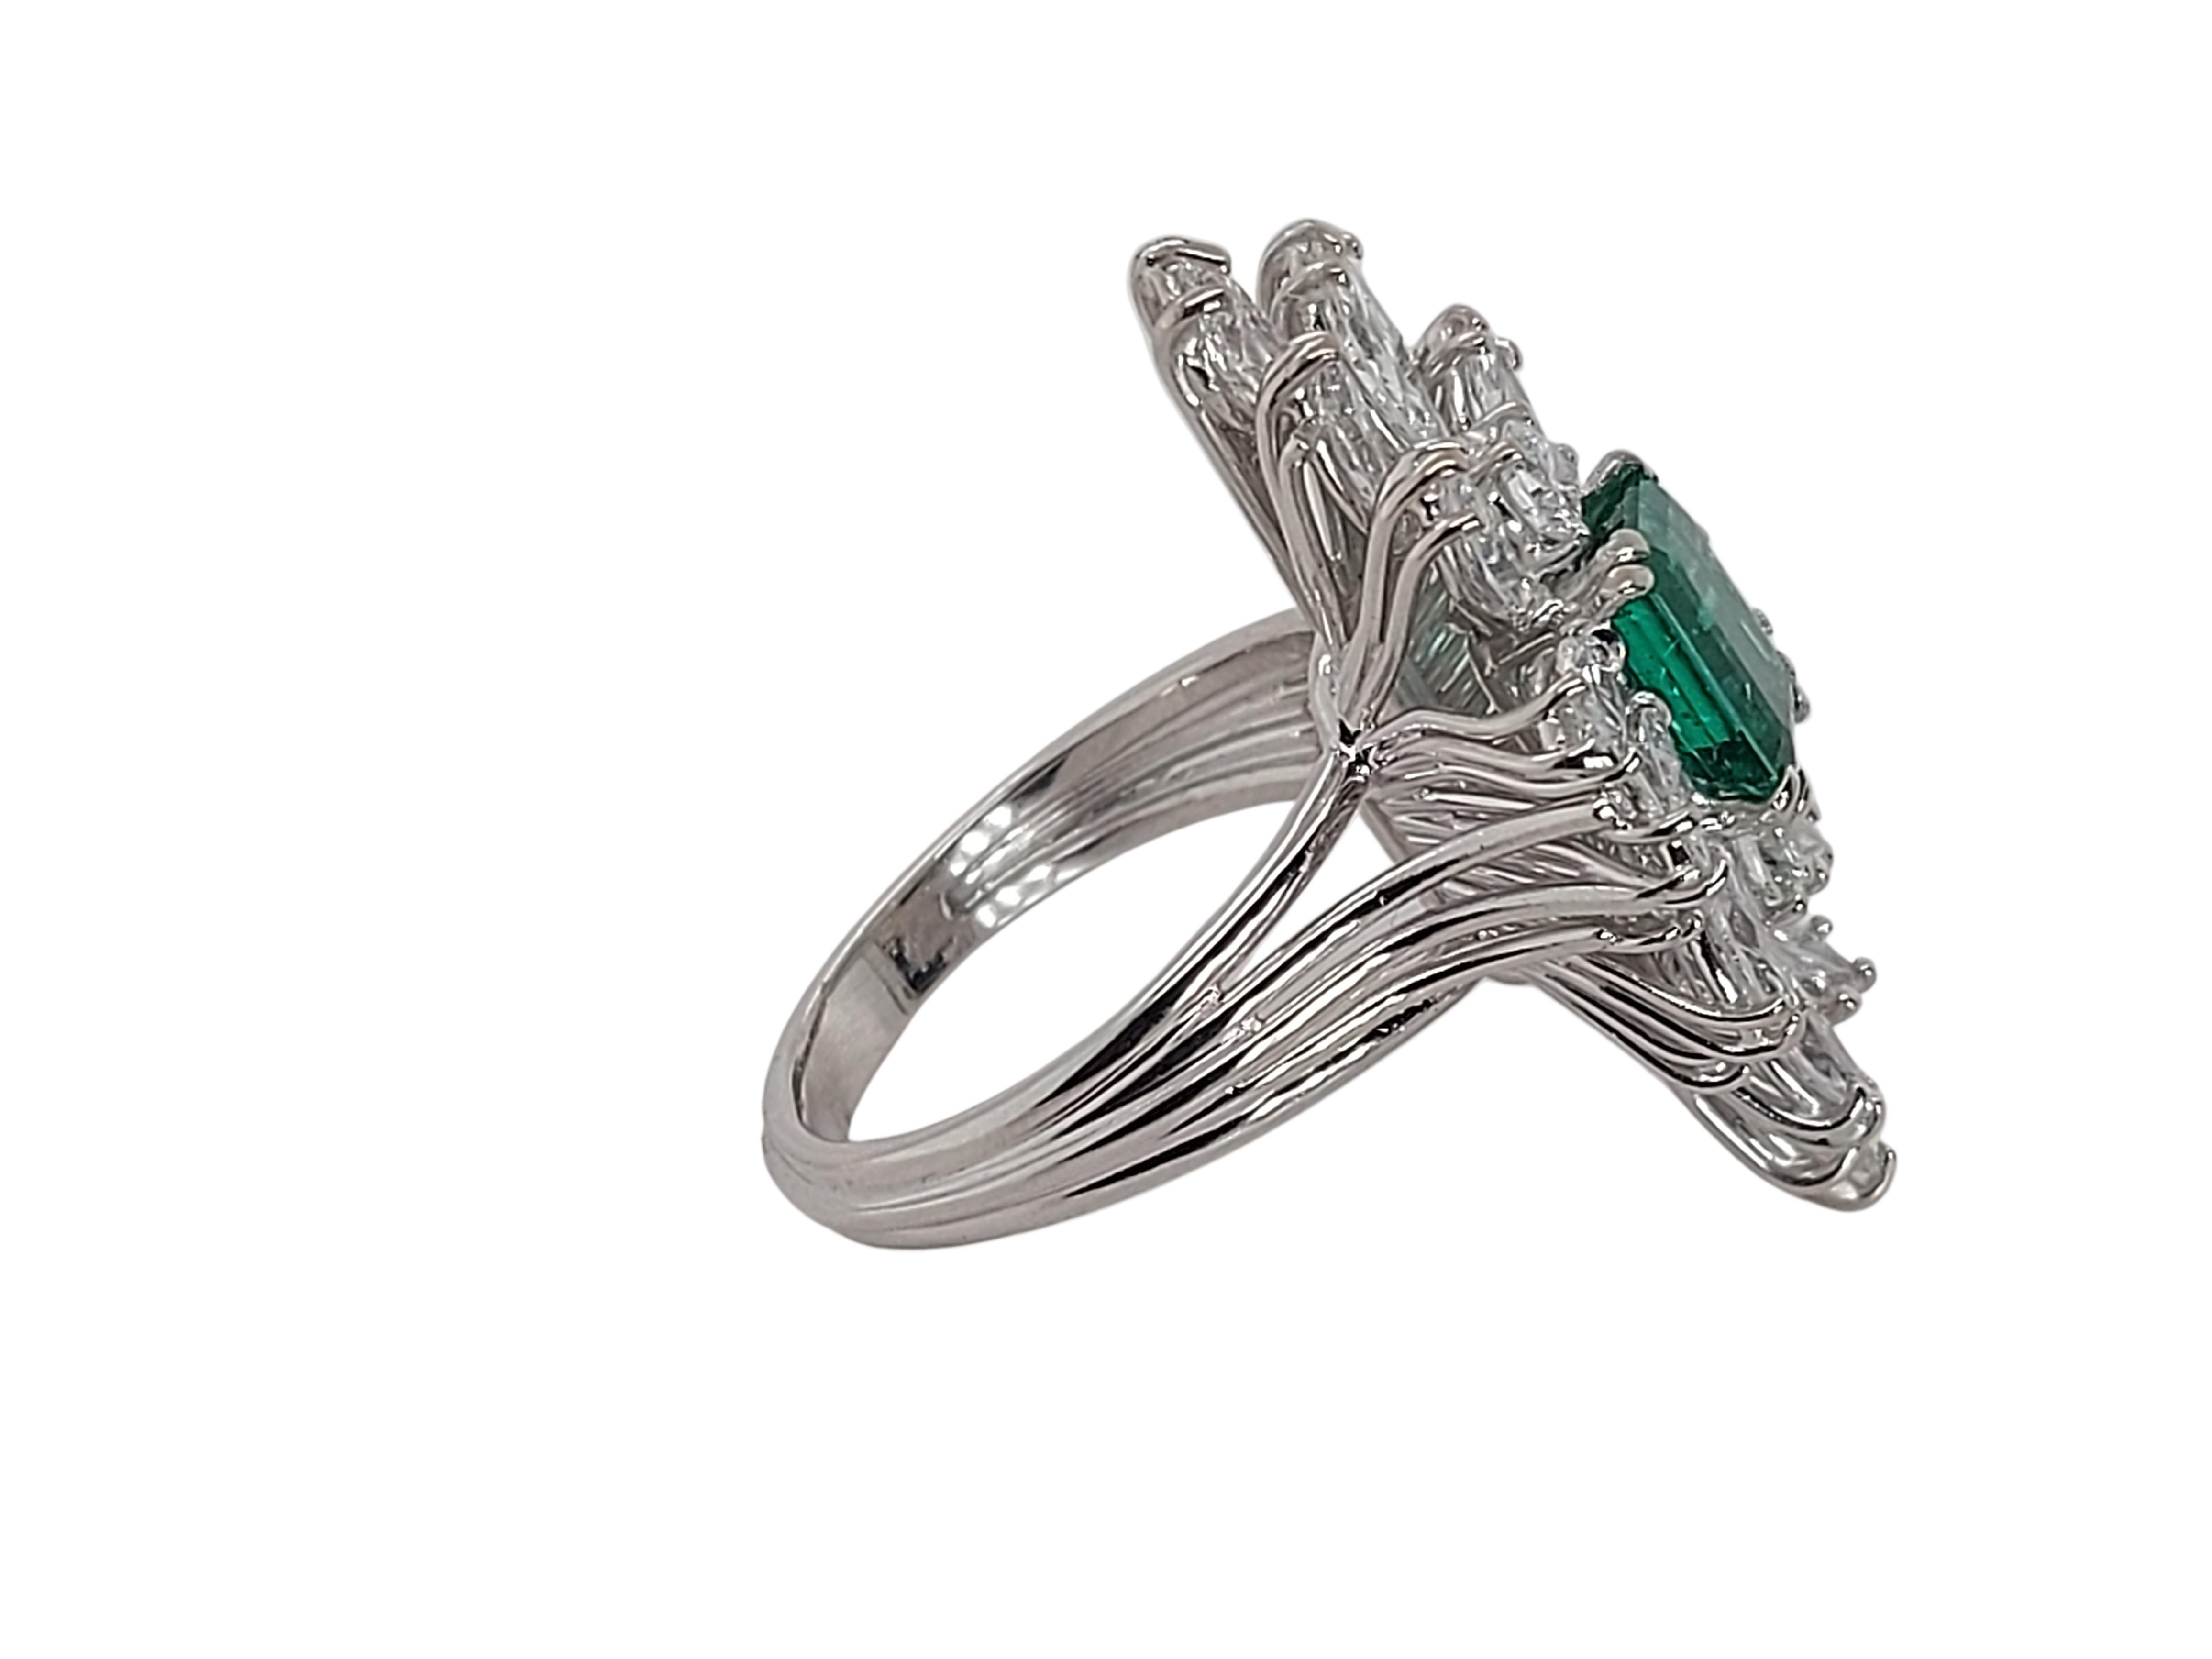 18kt White Gold Ring with 1.49 Ct Emerald Stone Surrounded by Diamonds For Sale 2